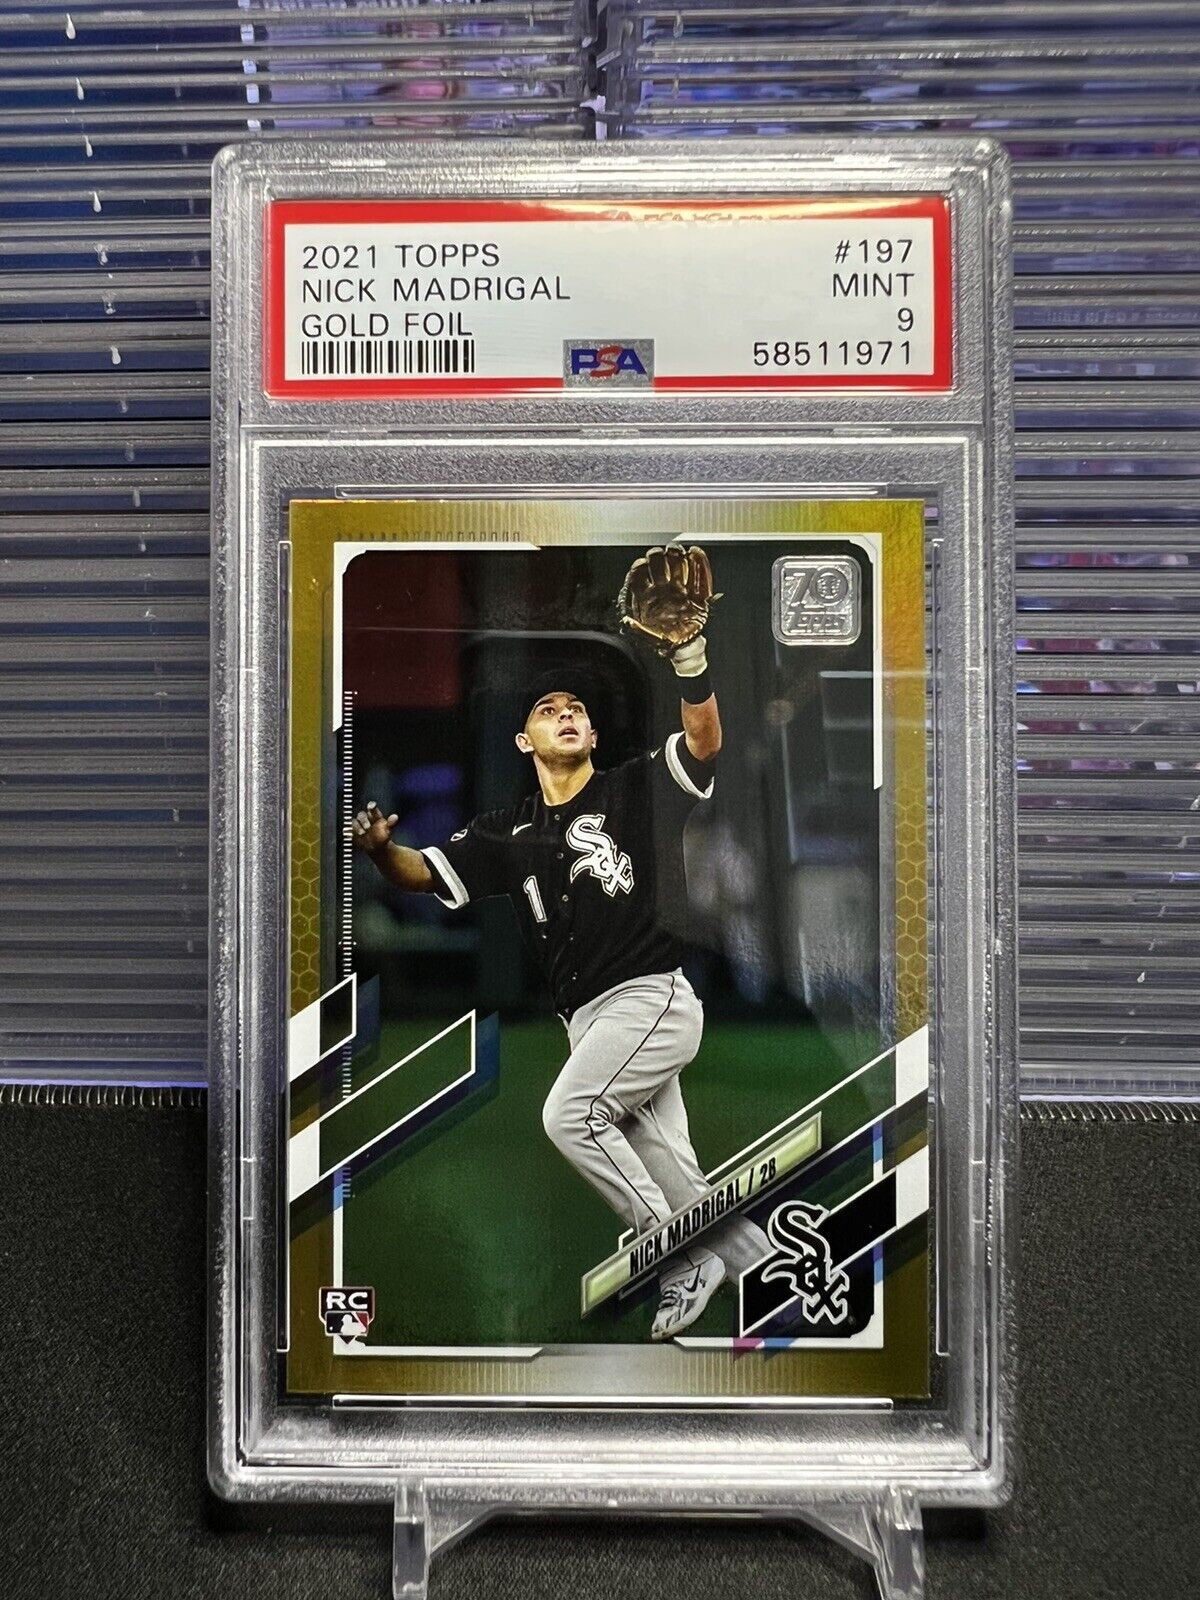 Nick Madrigal 2021 Topps Gold Foil #197 RC Rookie PSA 9 MINT